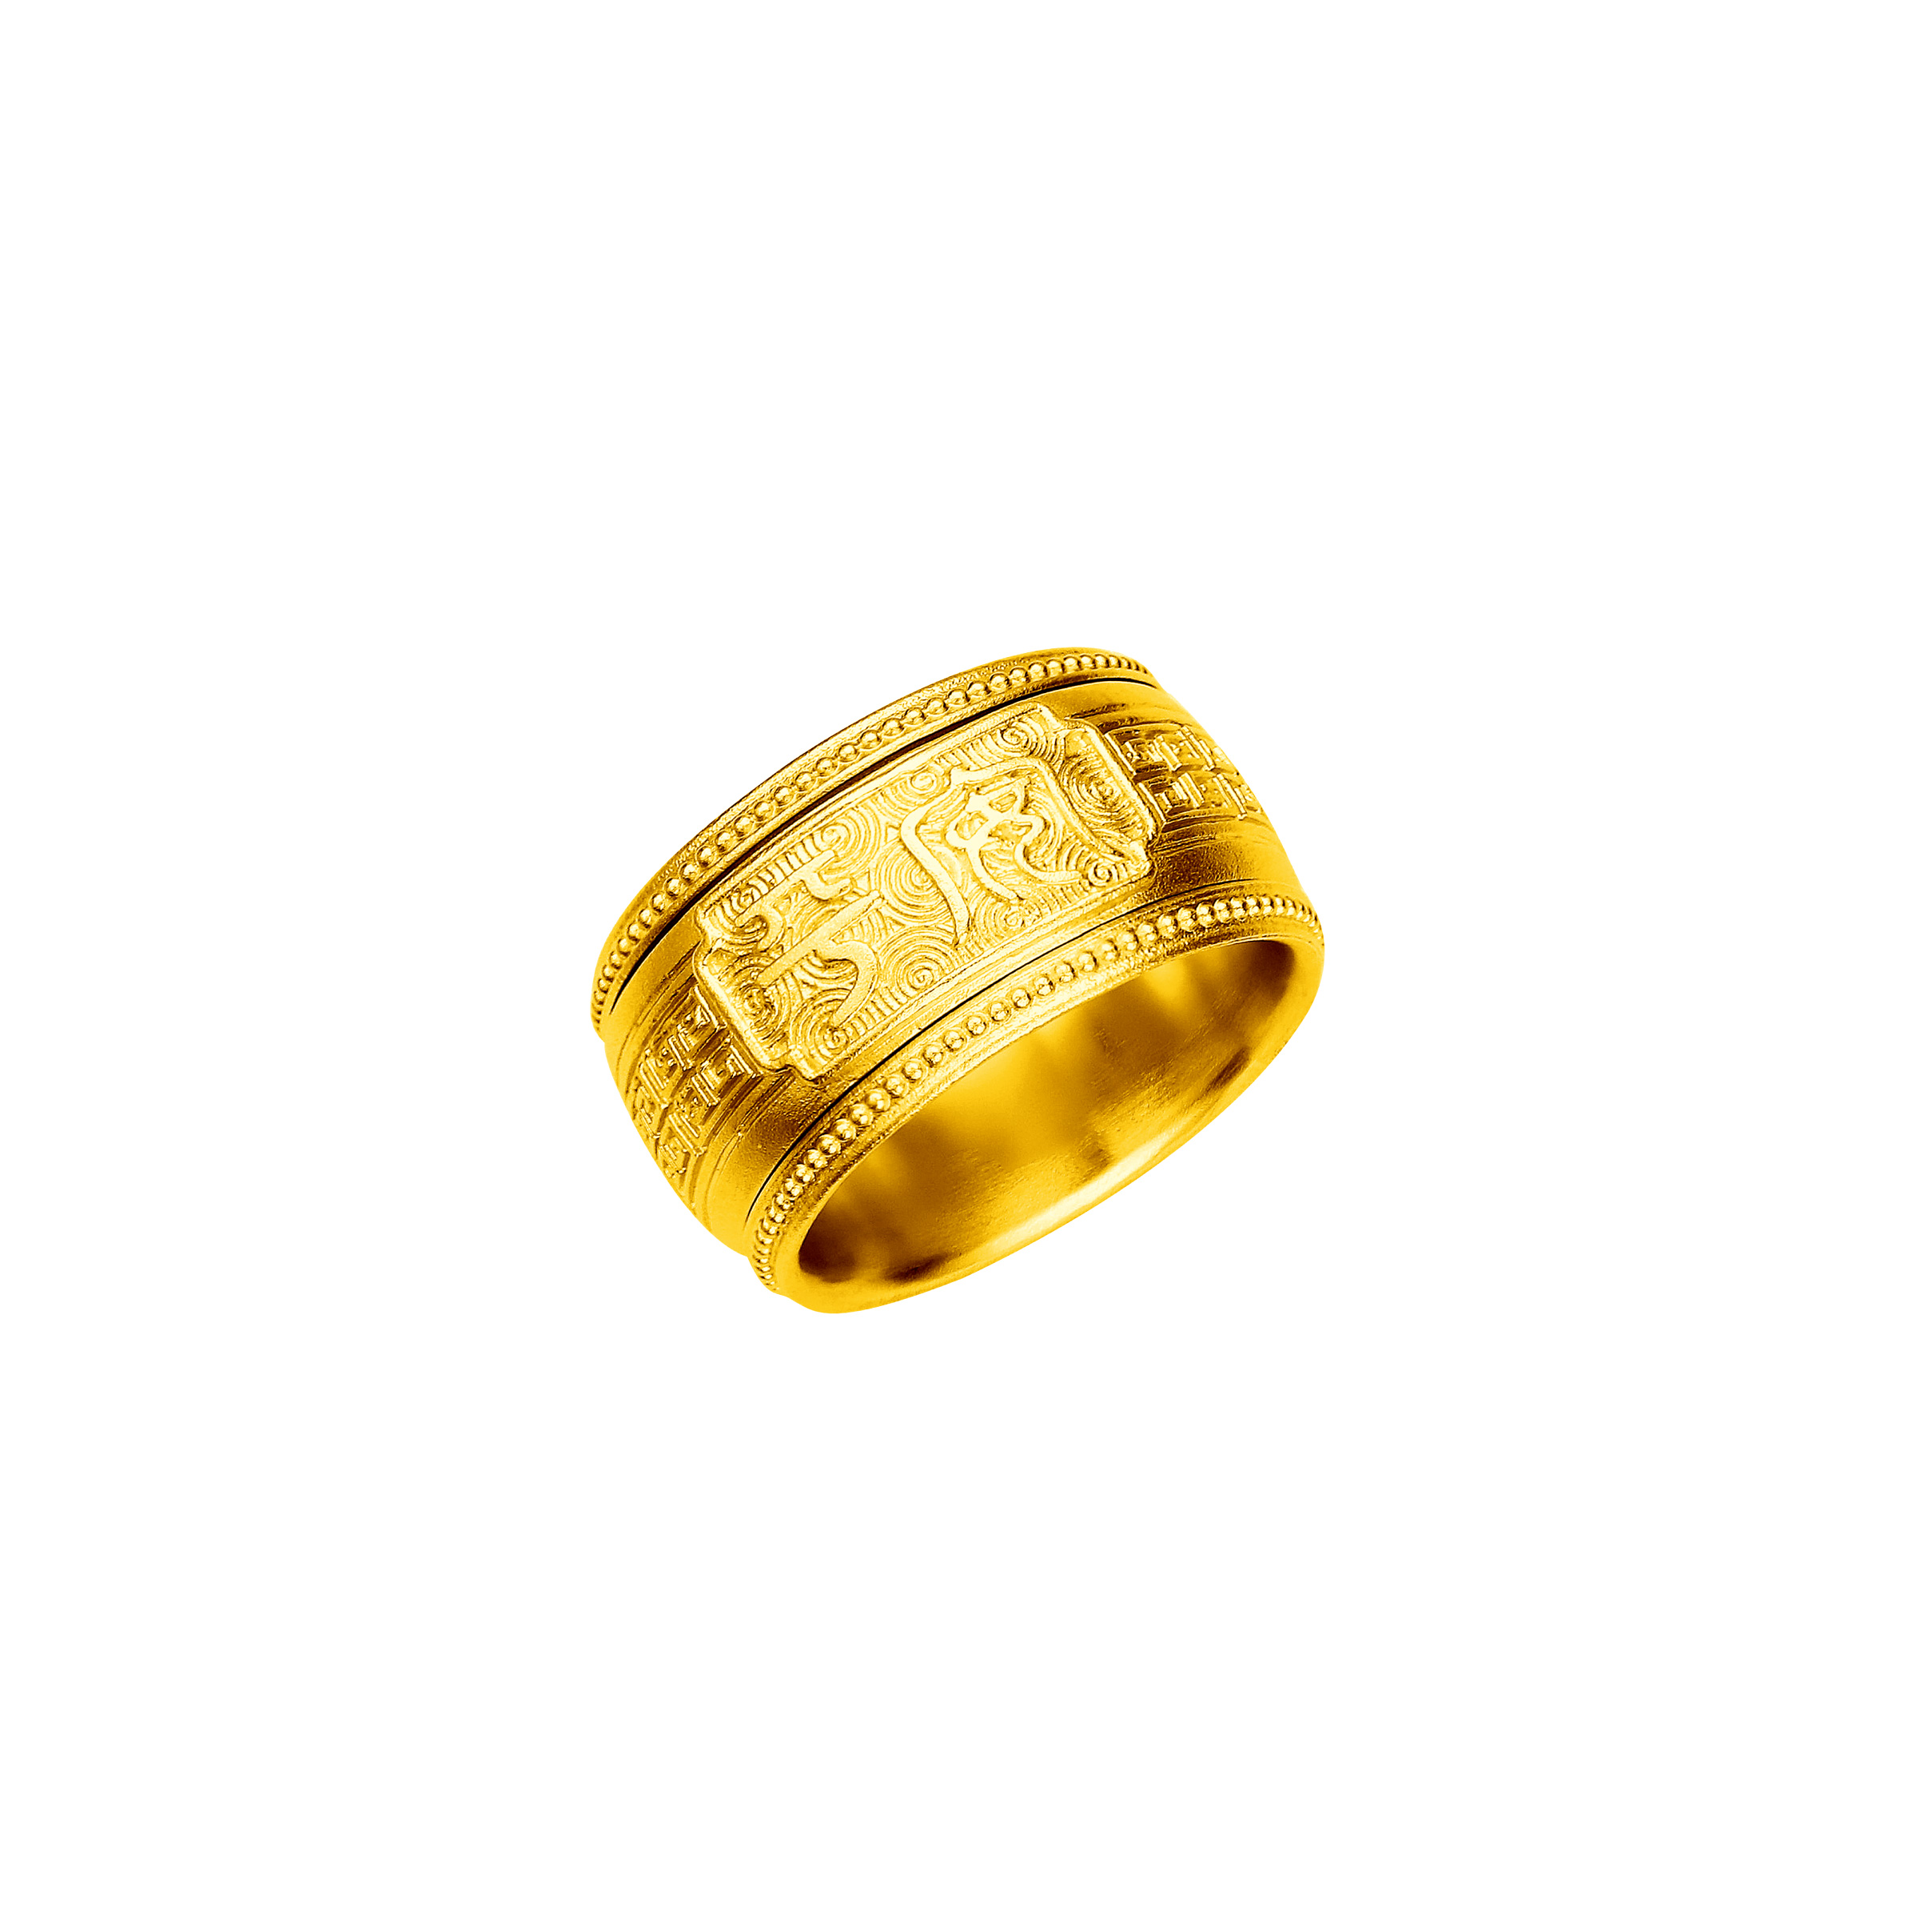 Antique Gold "Blessings" Gold Ring